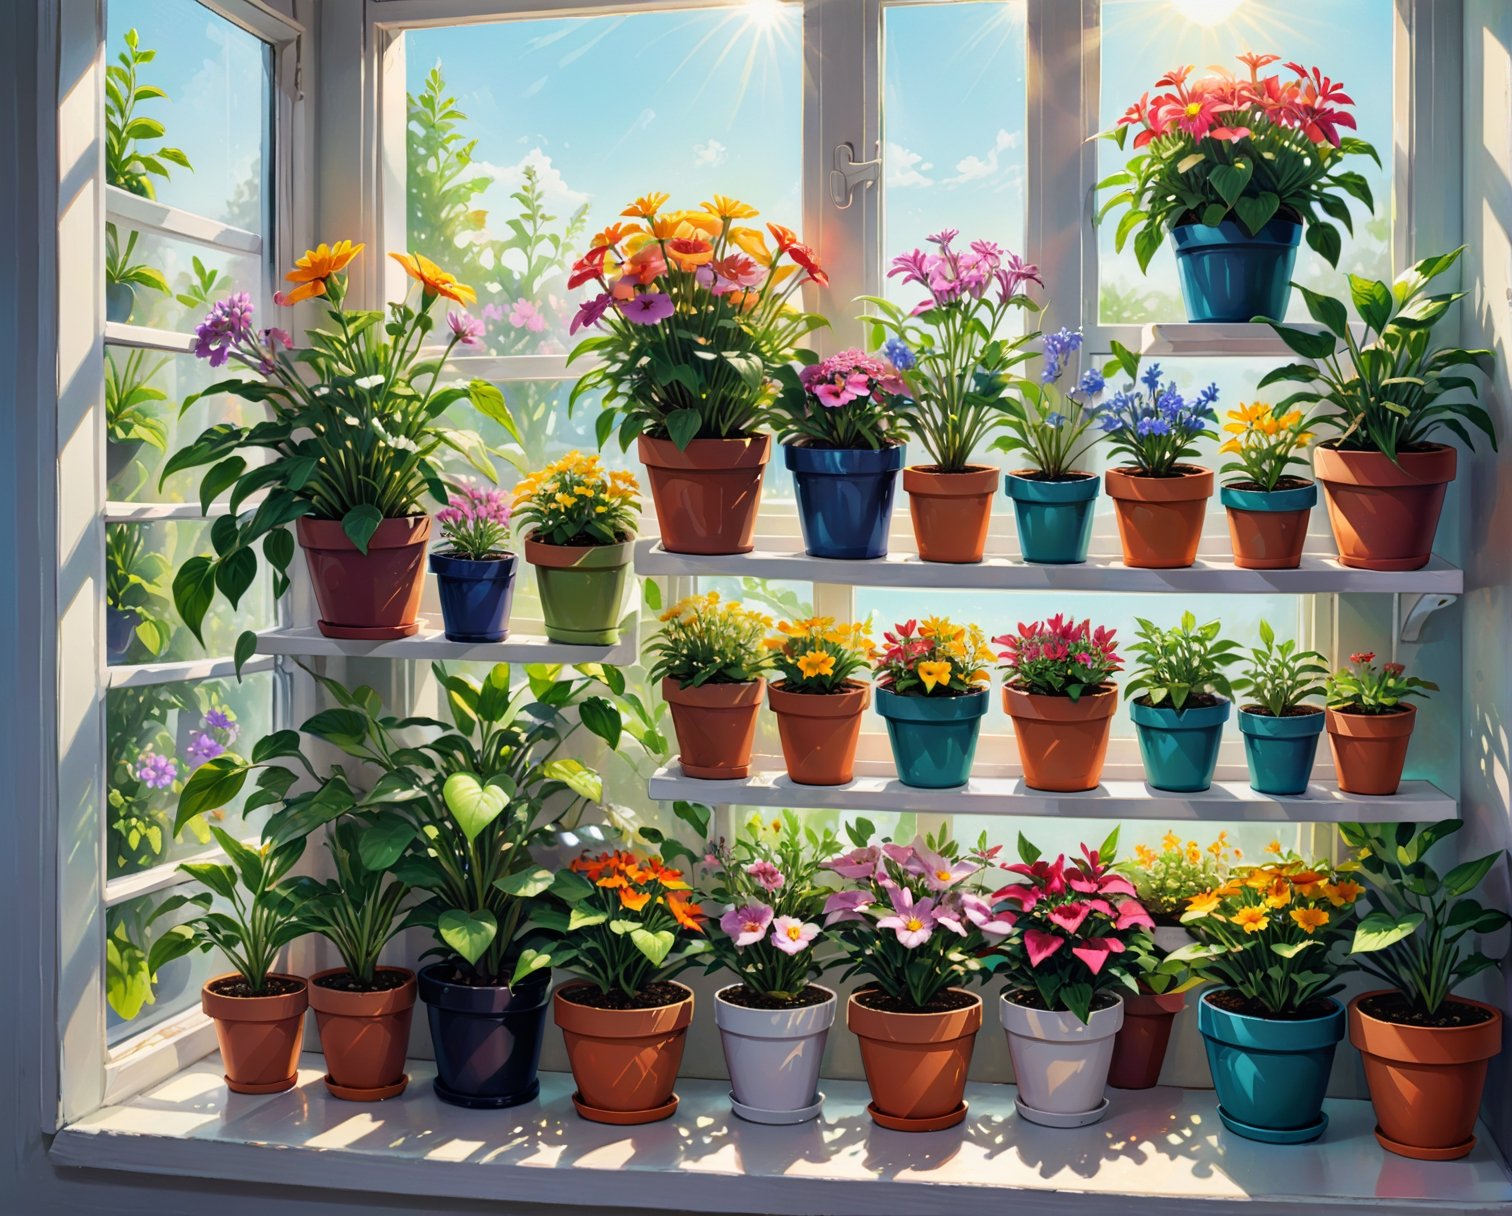 Acrylic illustration of shelf filled with potted flowers and other plants near a sunny window, vibrant colors, highly detailed.